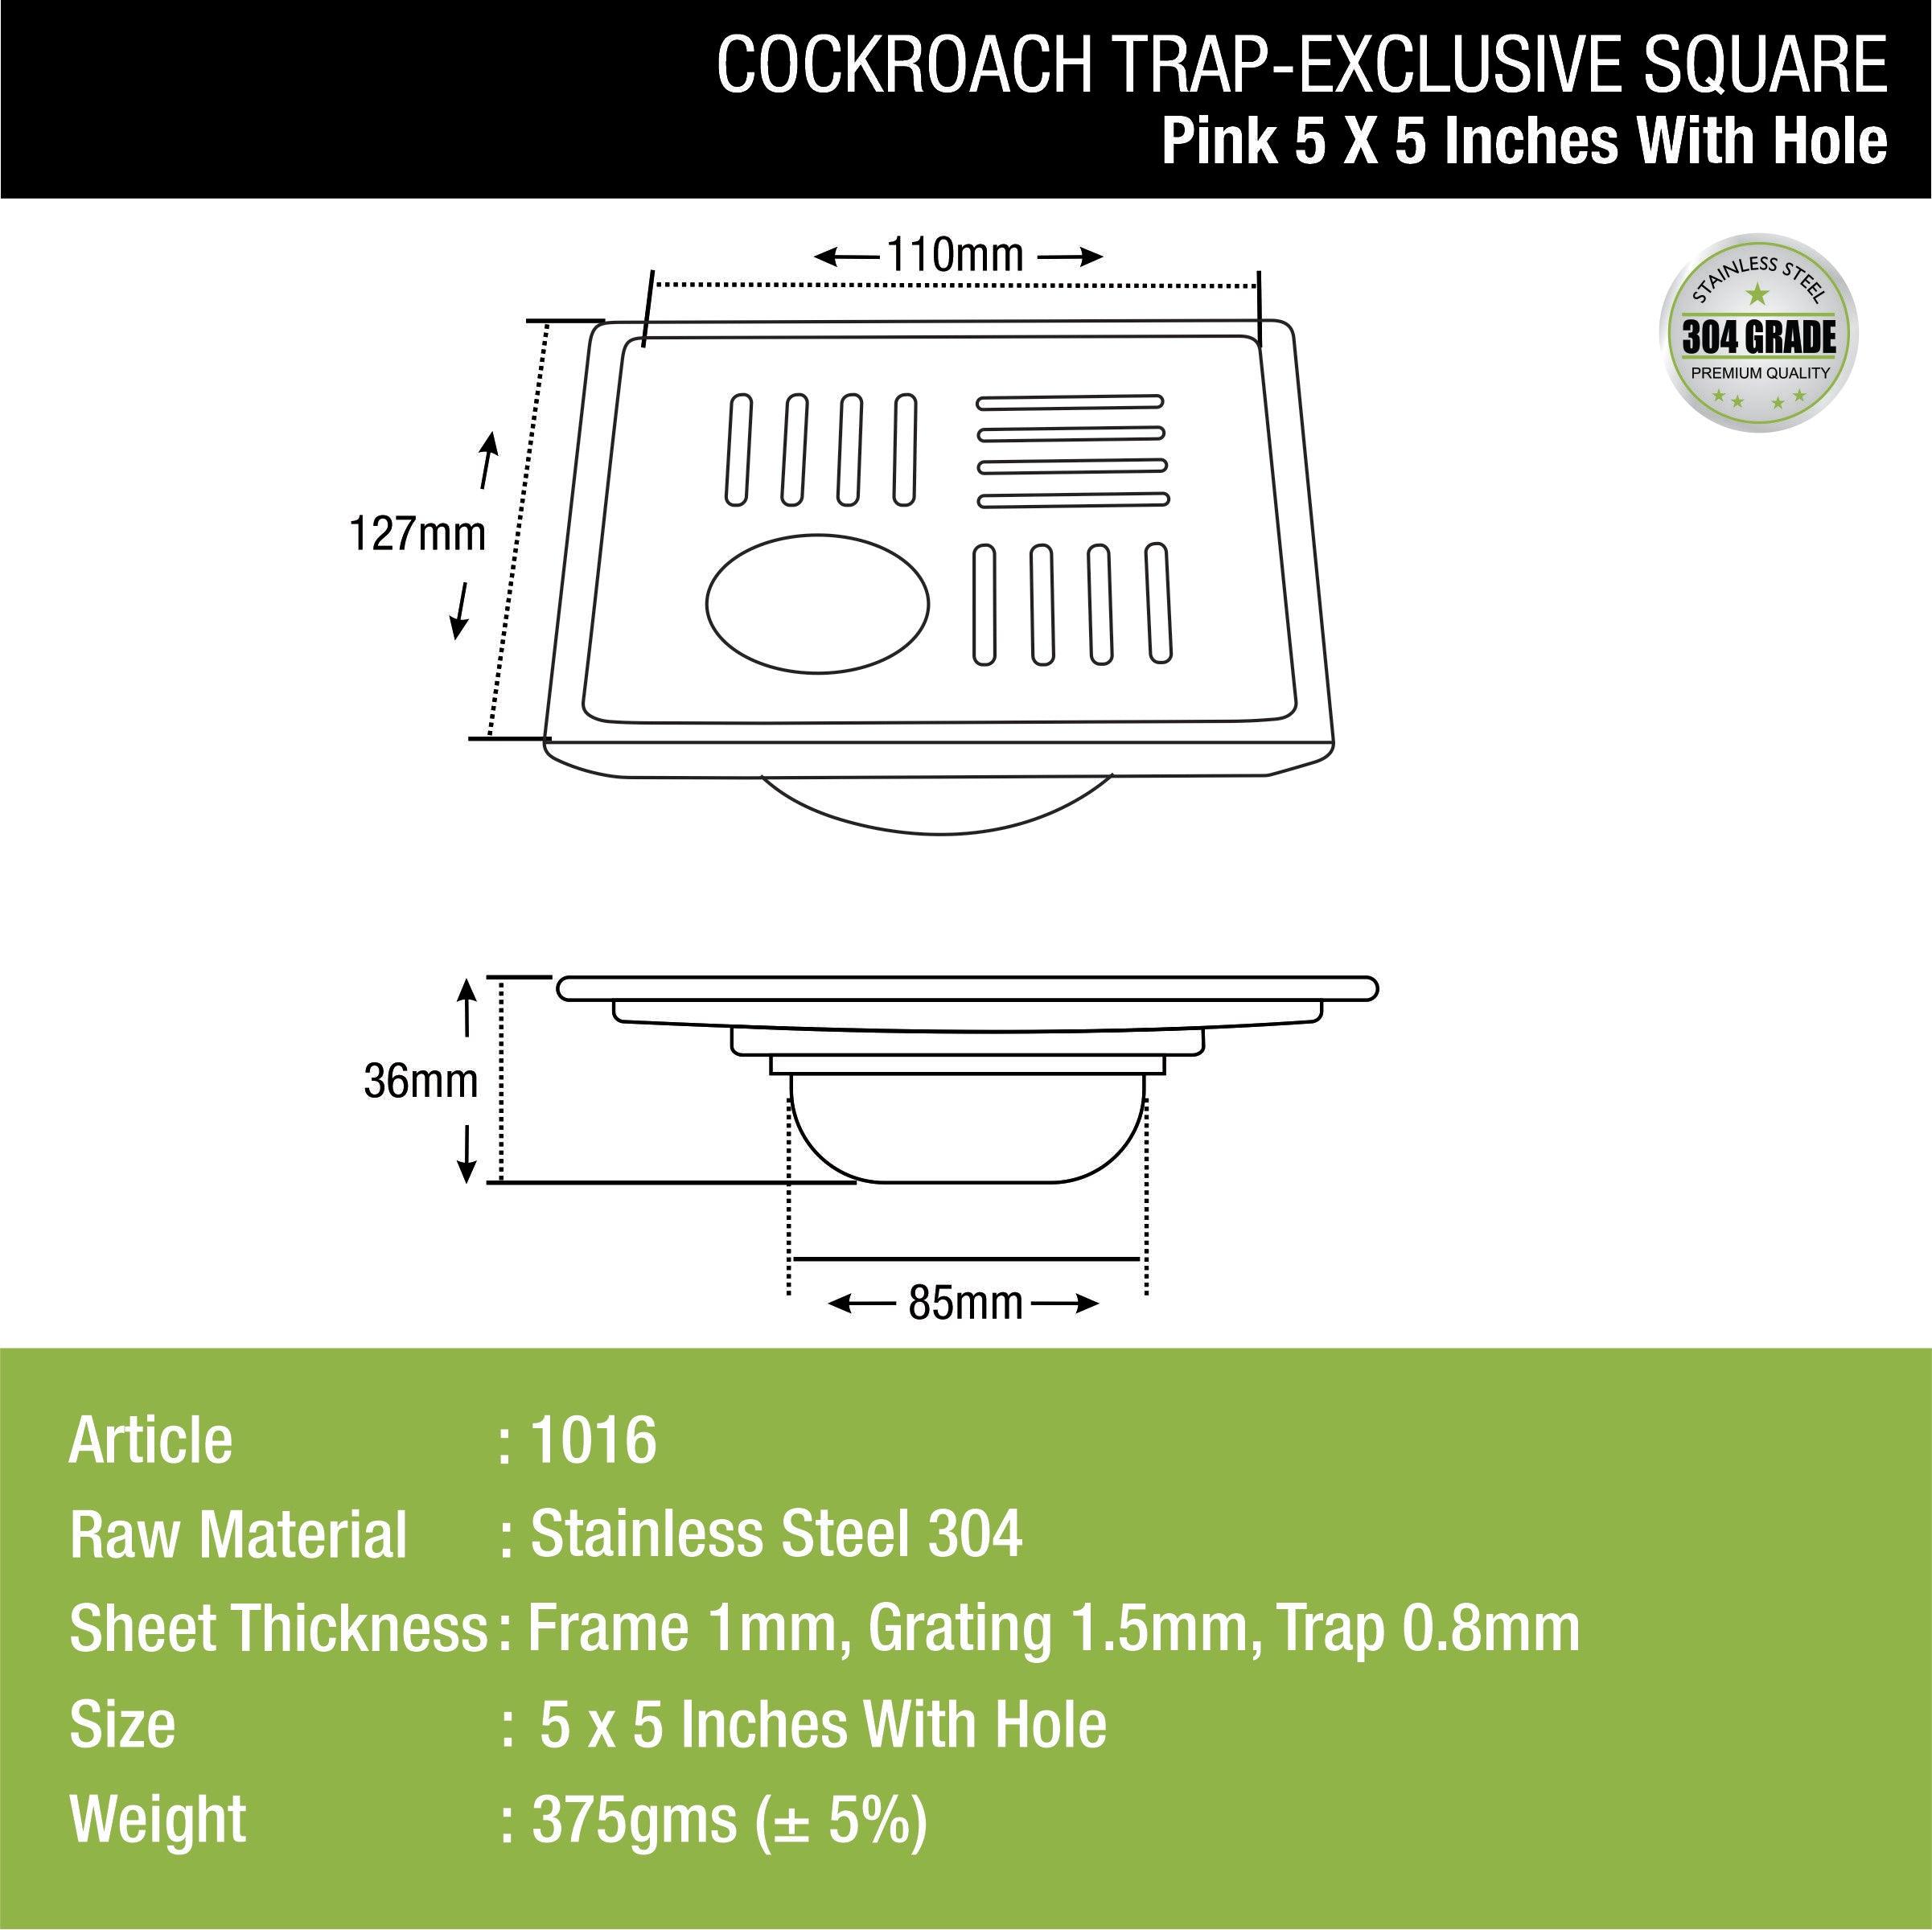 Pink Exclusive Square Floor Drain (5 x 5 Inches) with Hole and Cockroach Trap dimensions and sizes